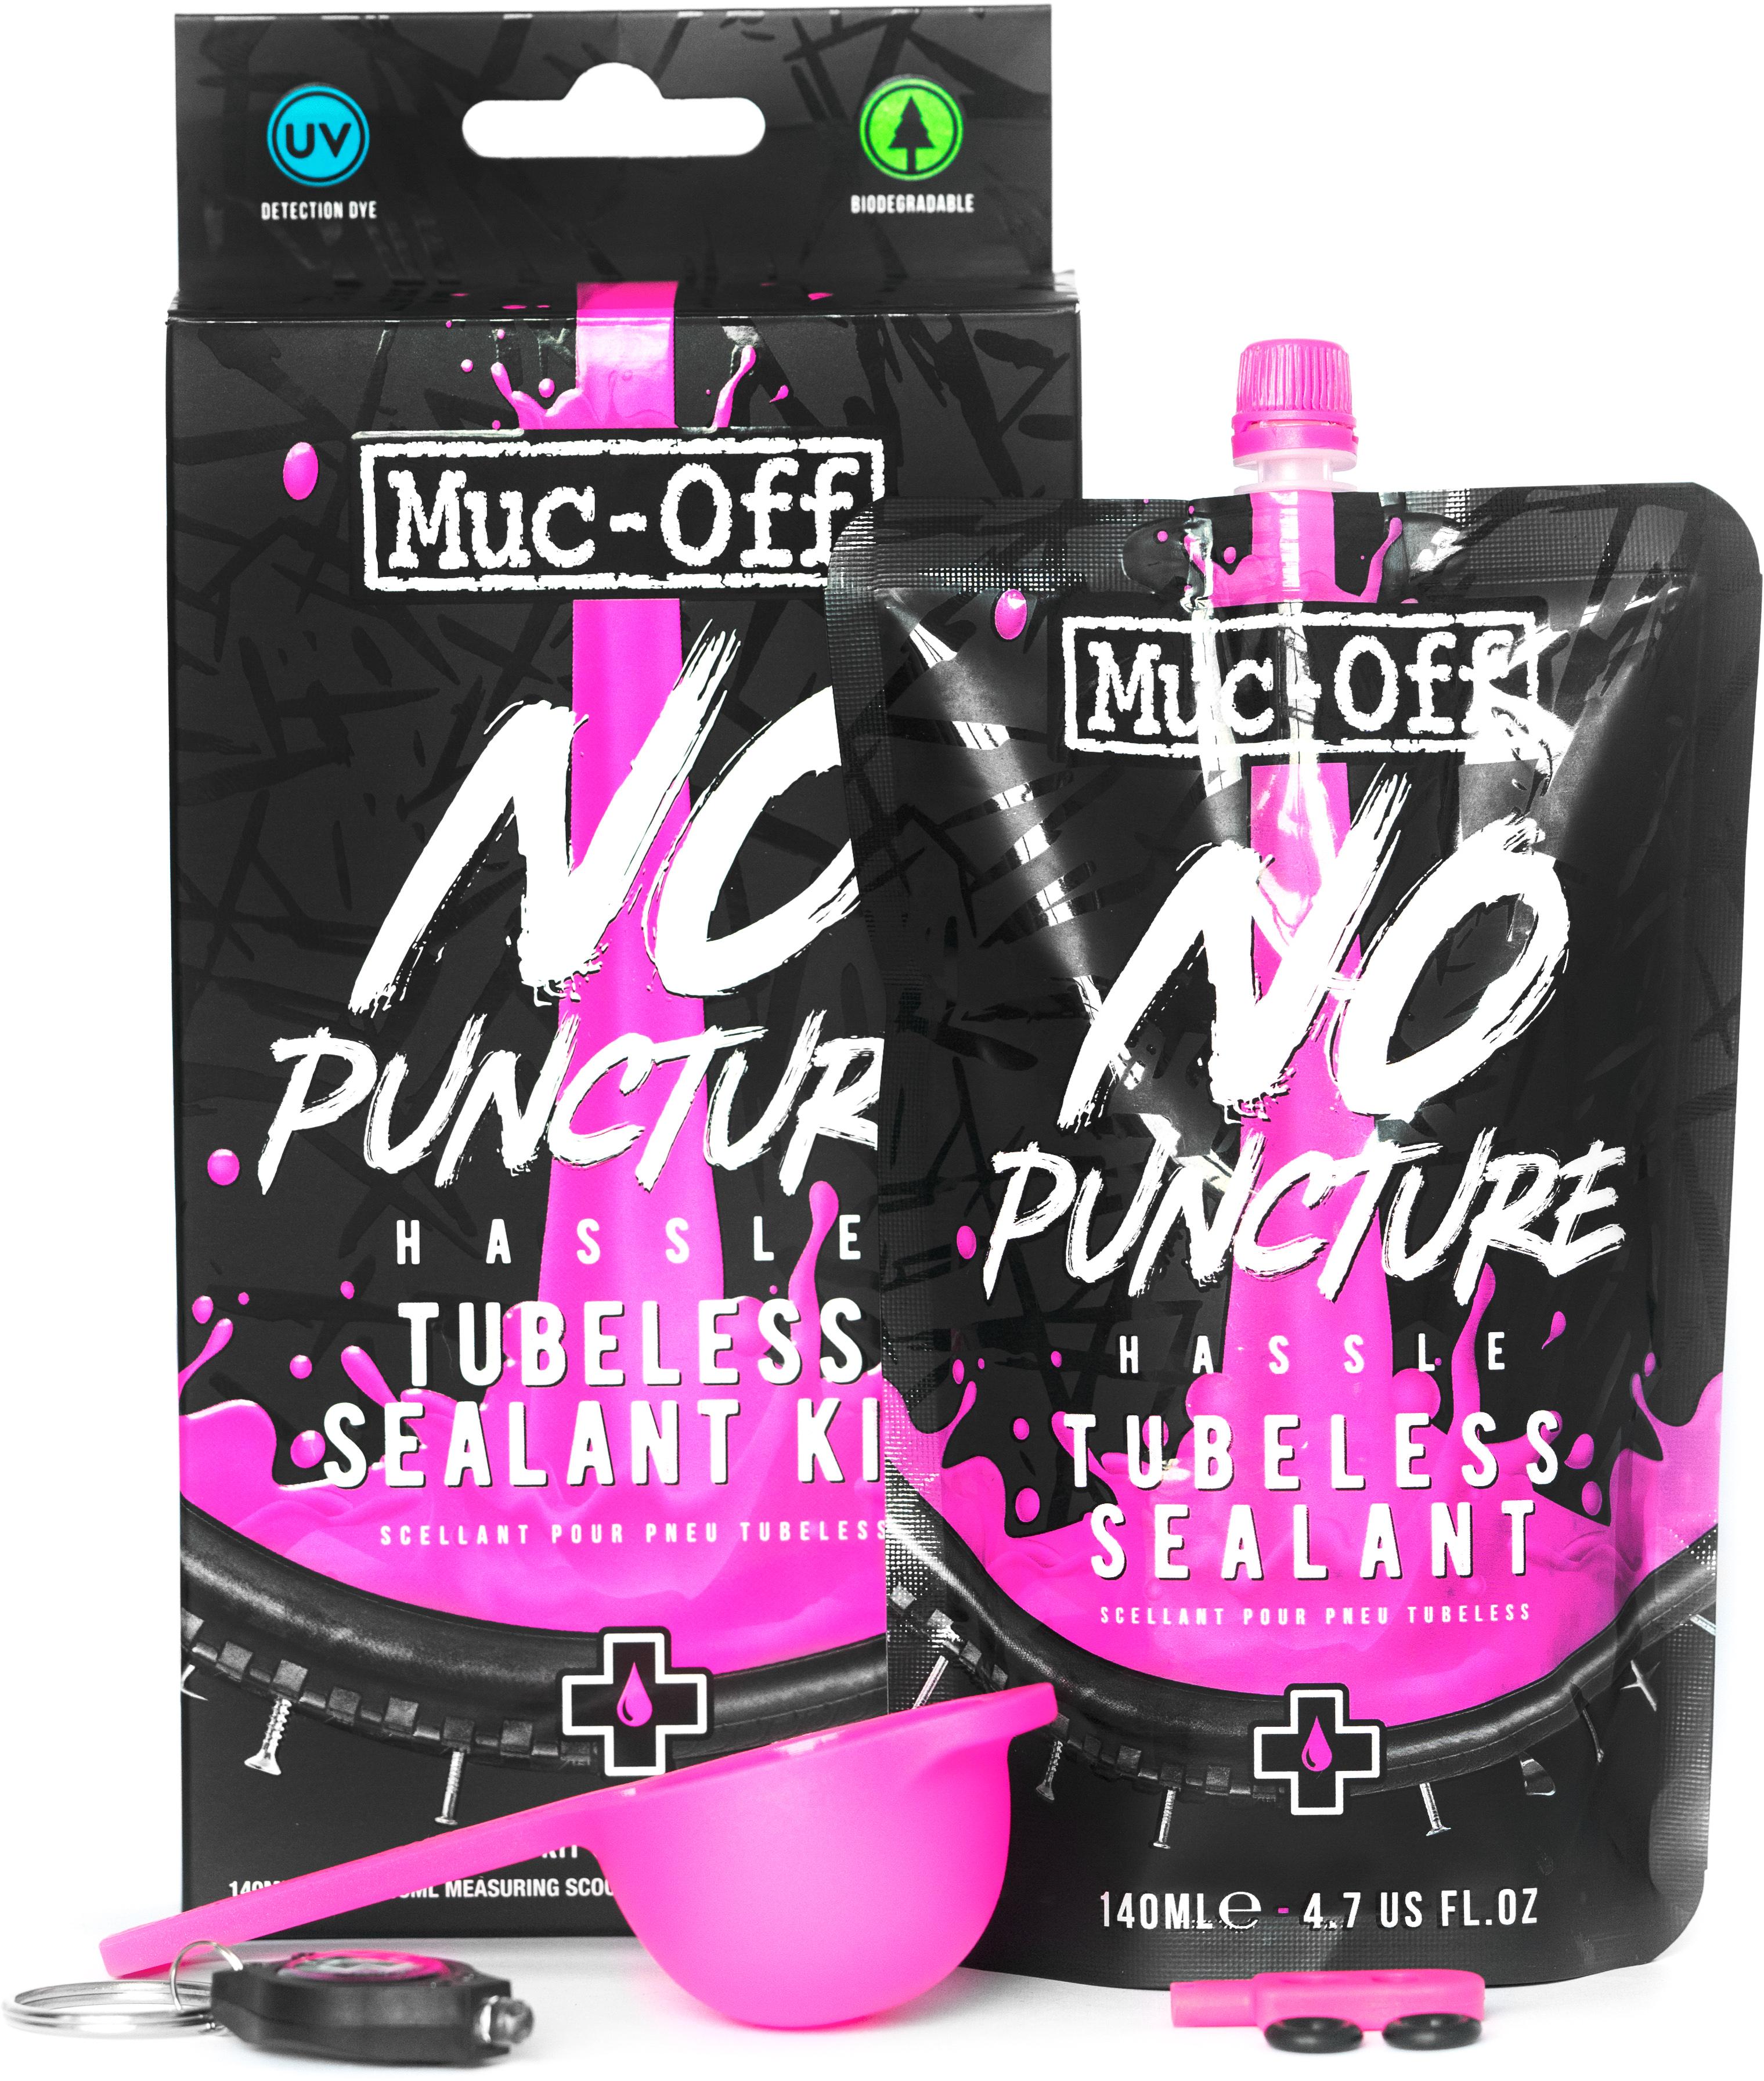 Muc-off No Puncture Hassle 140ml Kit - Black